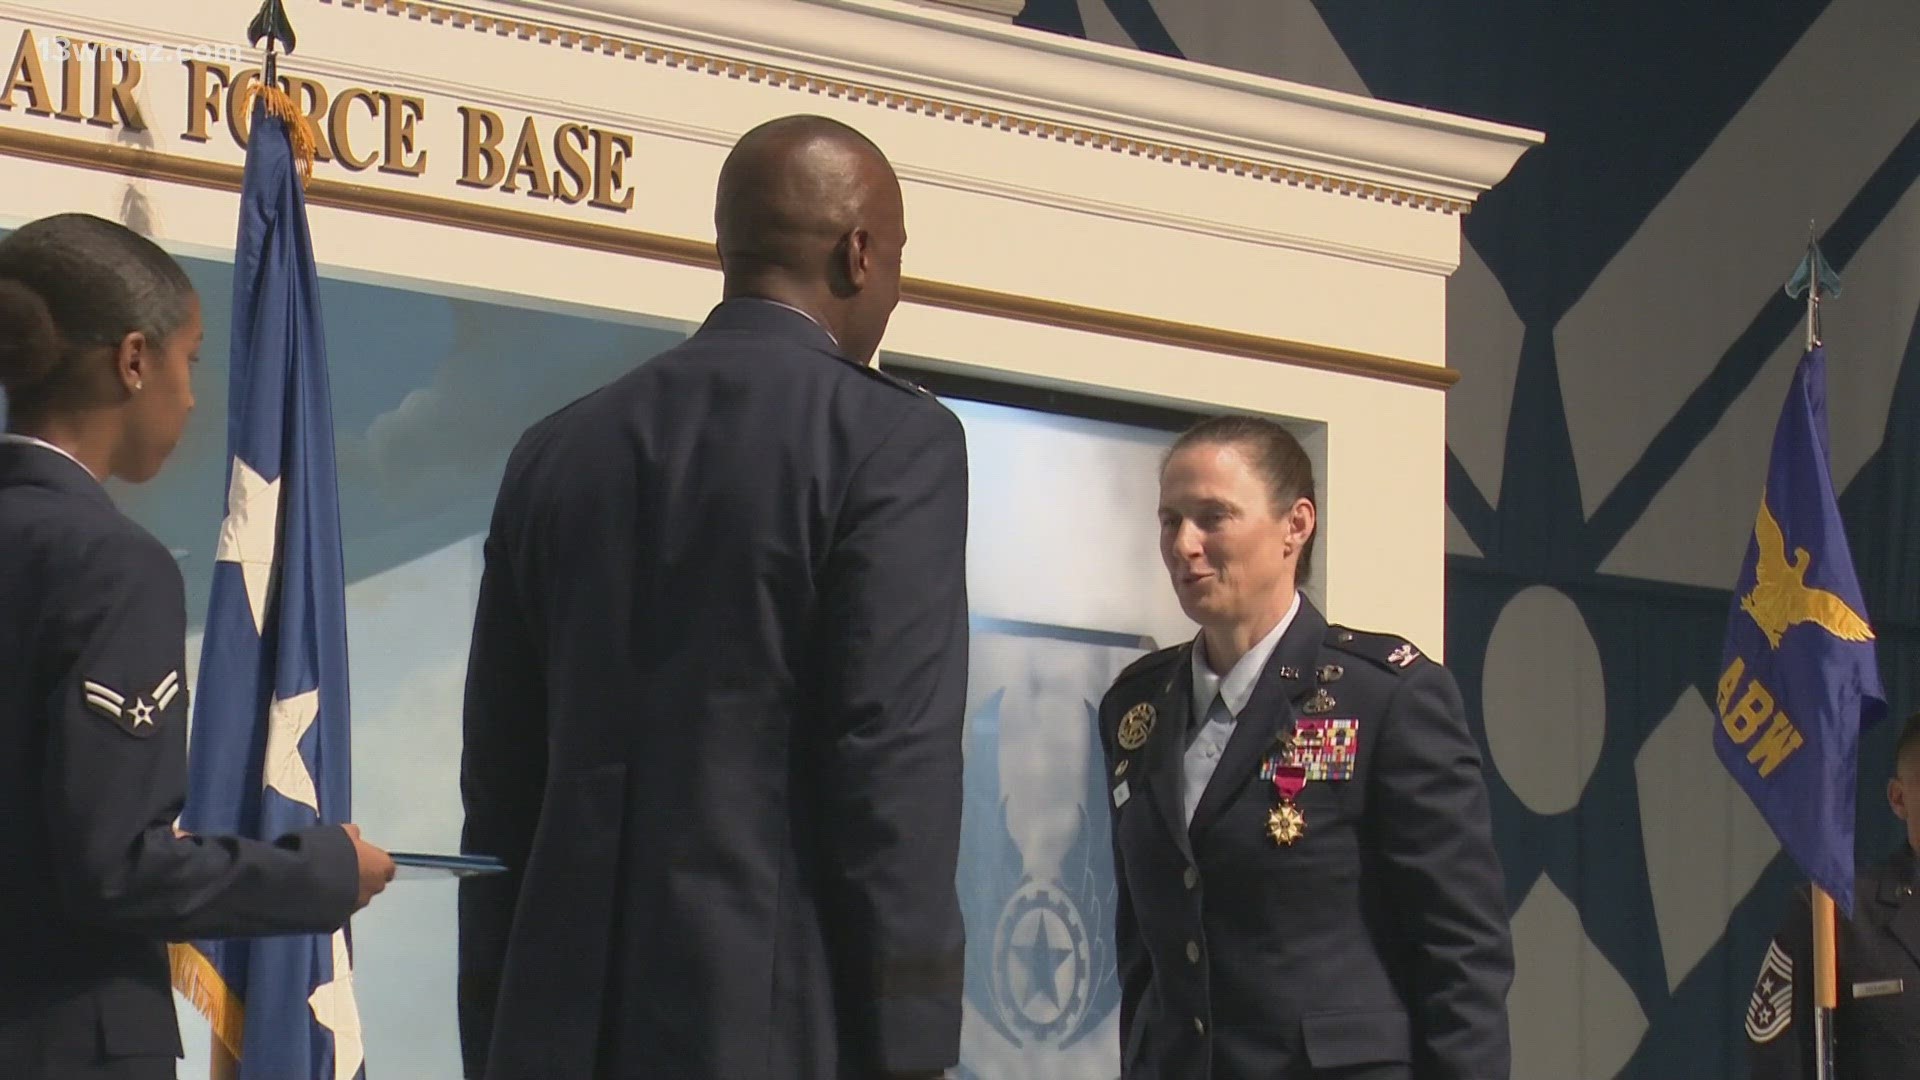 Robins Air Force Base welcomes new commander | 13wmaz.com